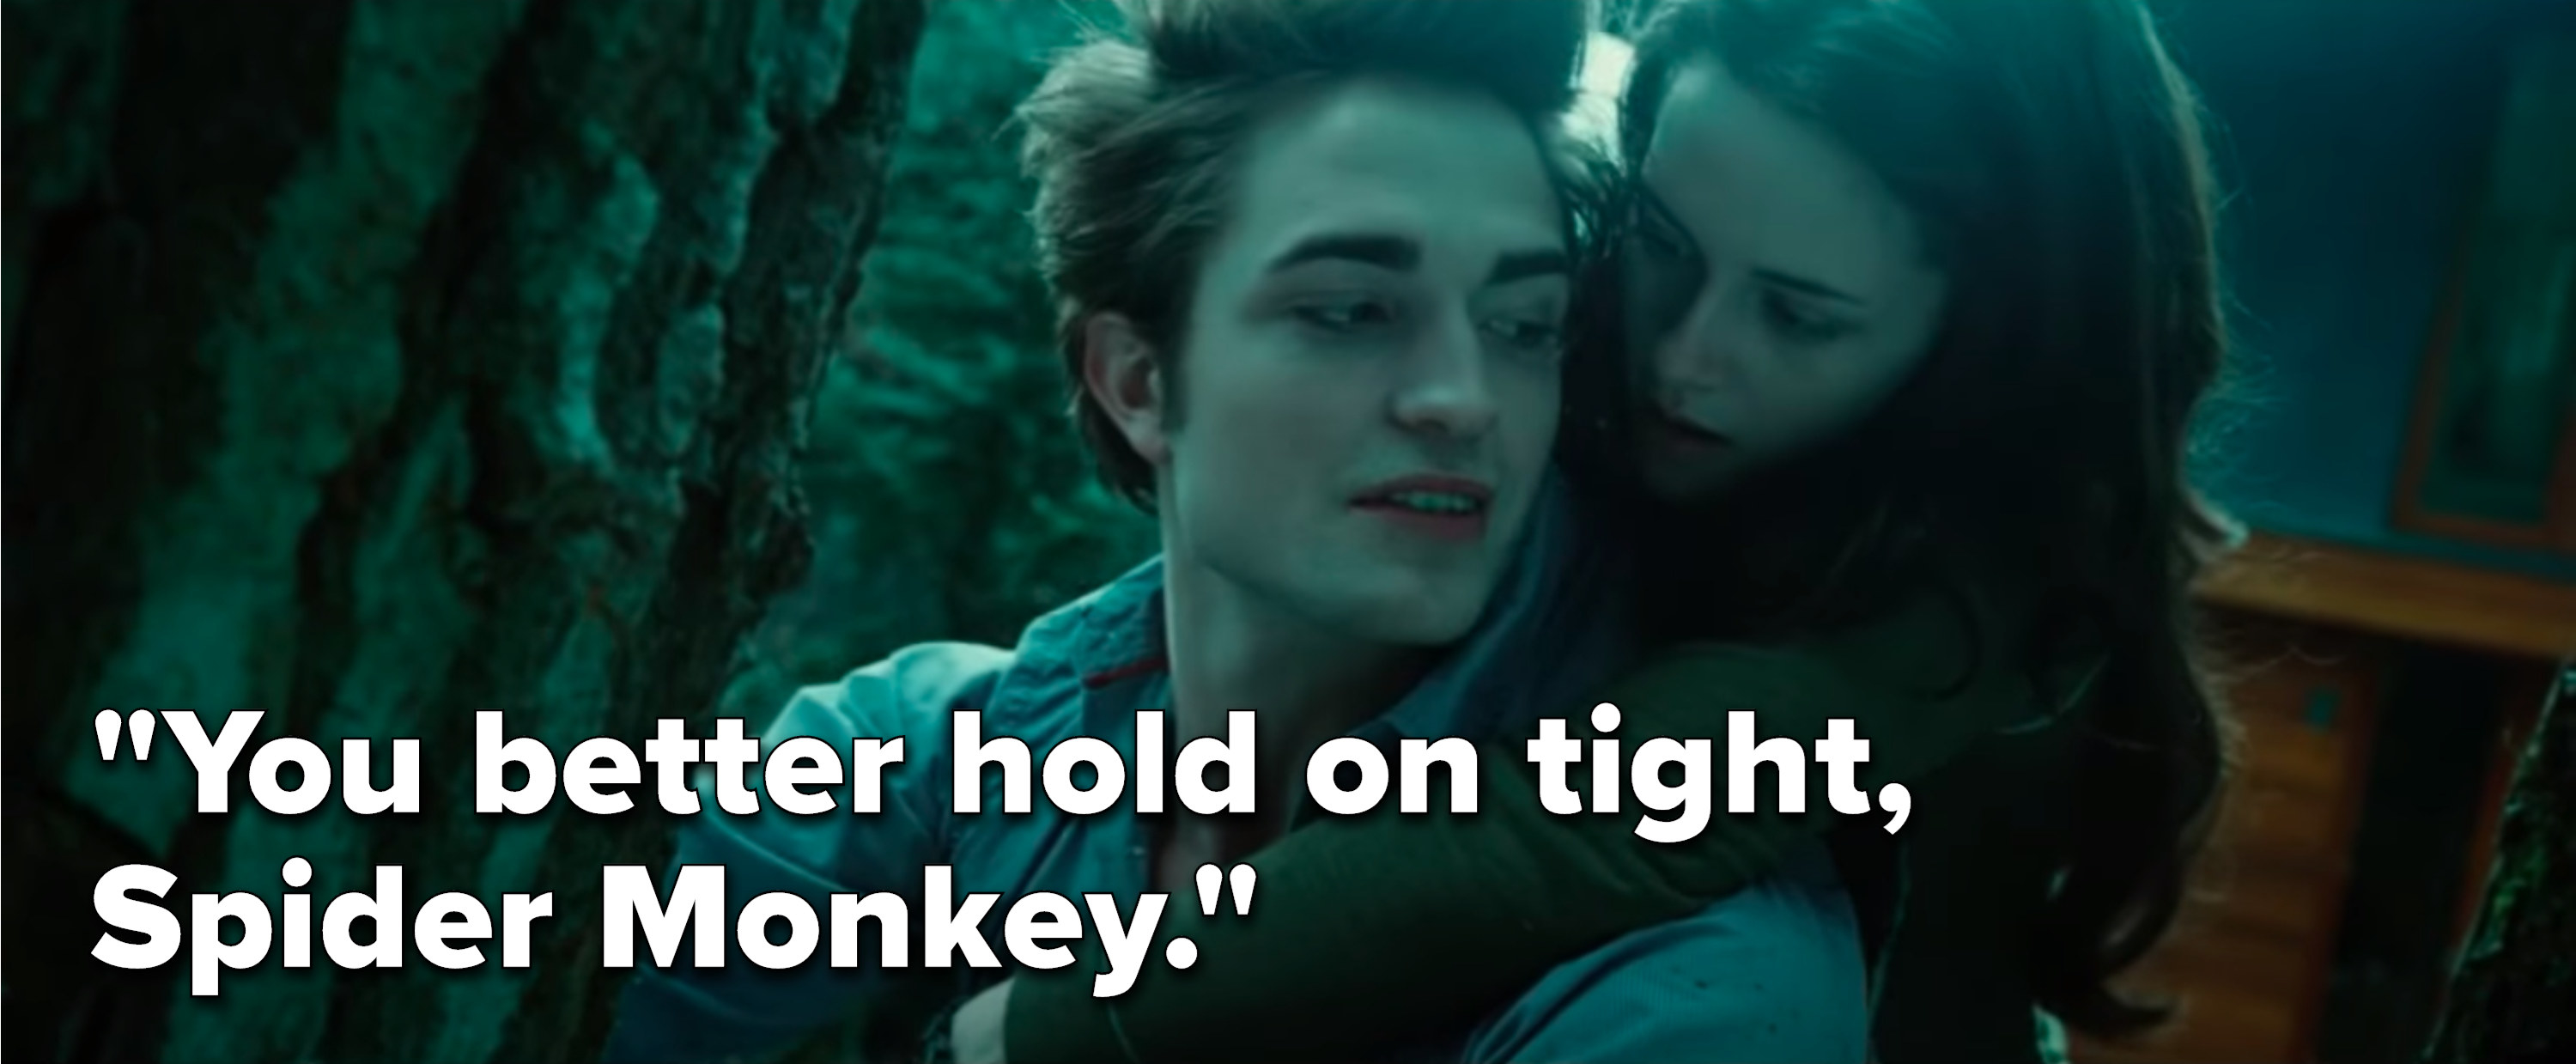 21 Movies Lines That Are Accidentally Funny